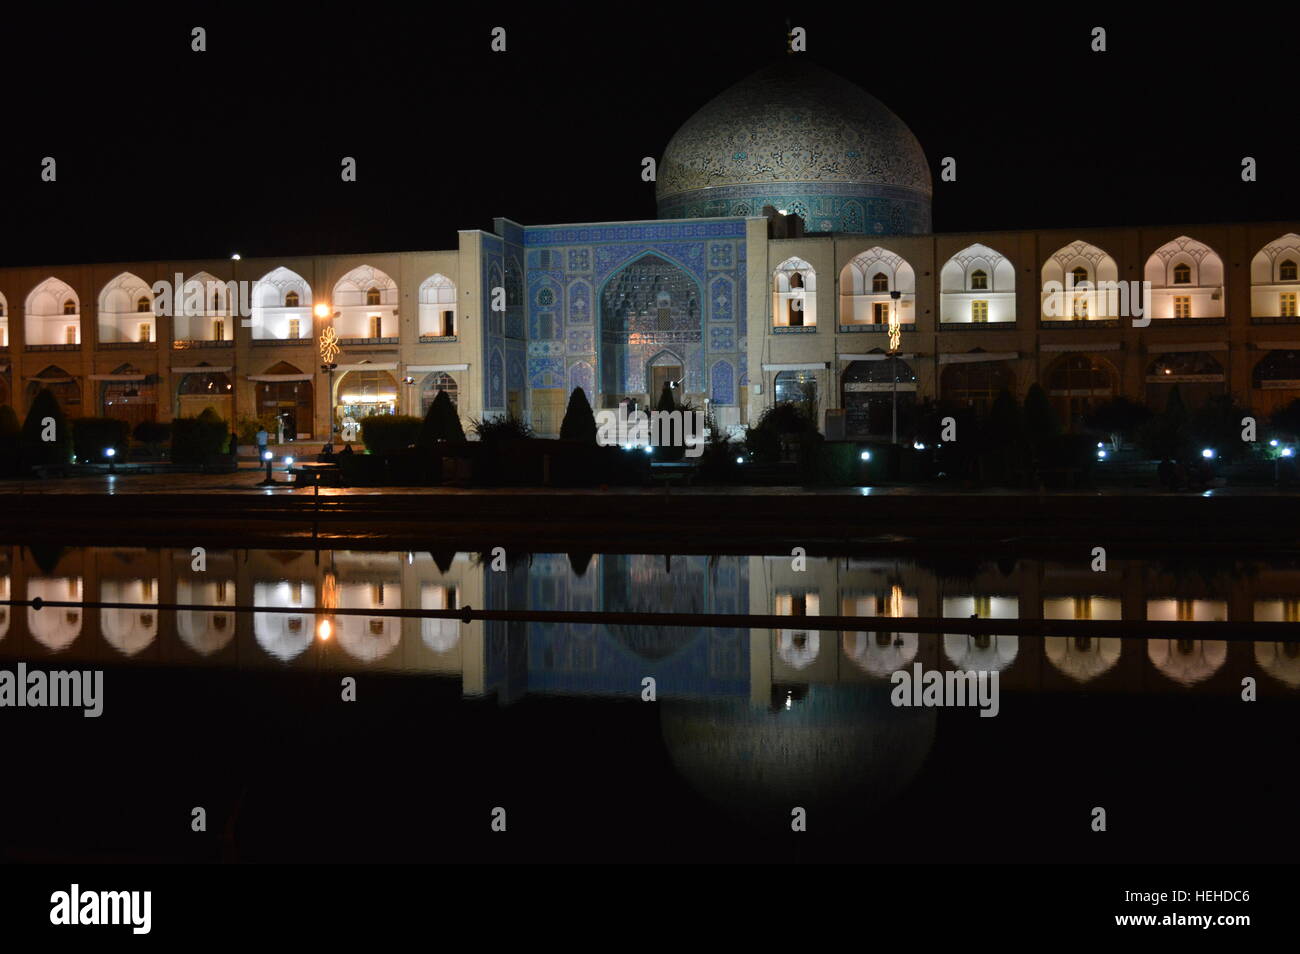 Sheikh Lotf Allah Mosque in Imam Square, Isfahan, Iran Stock Photo